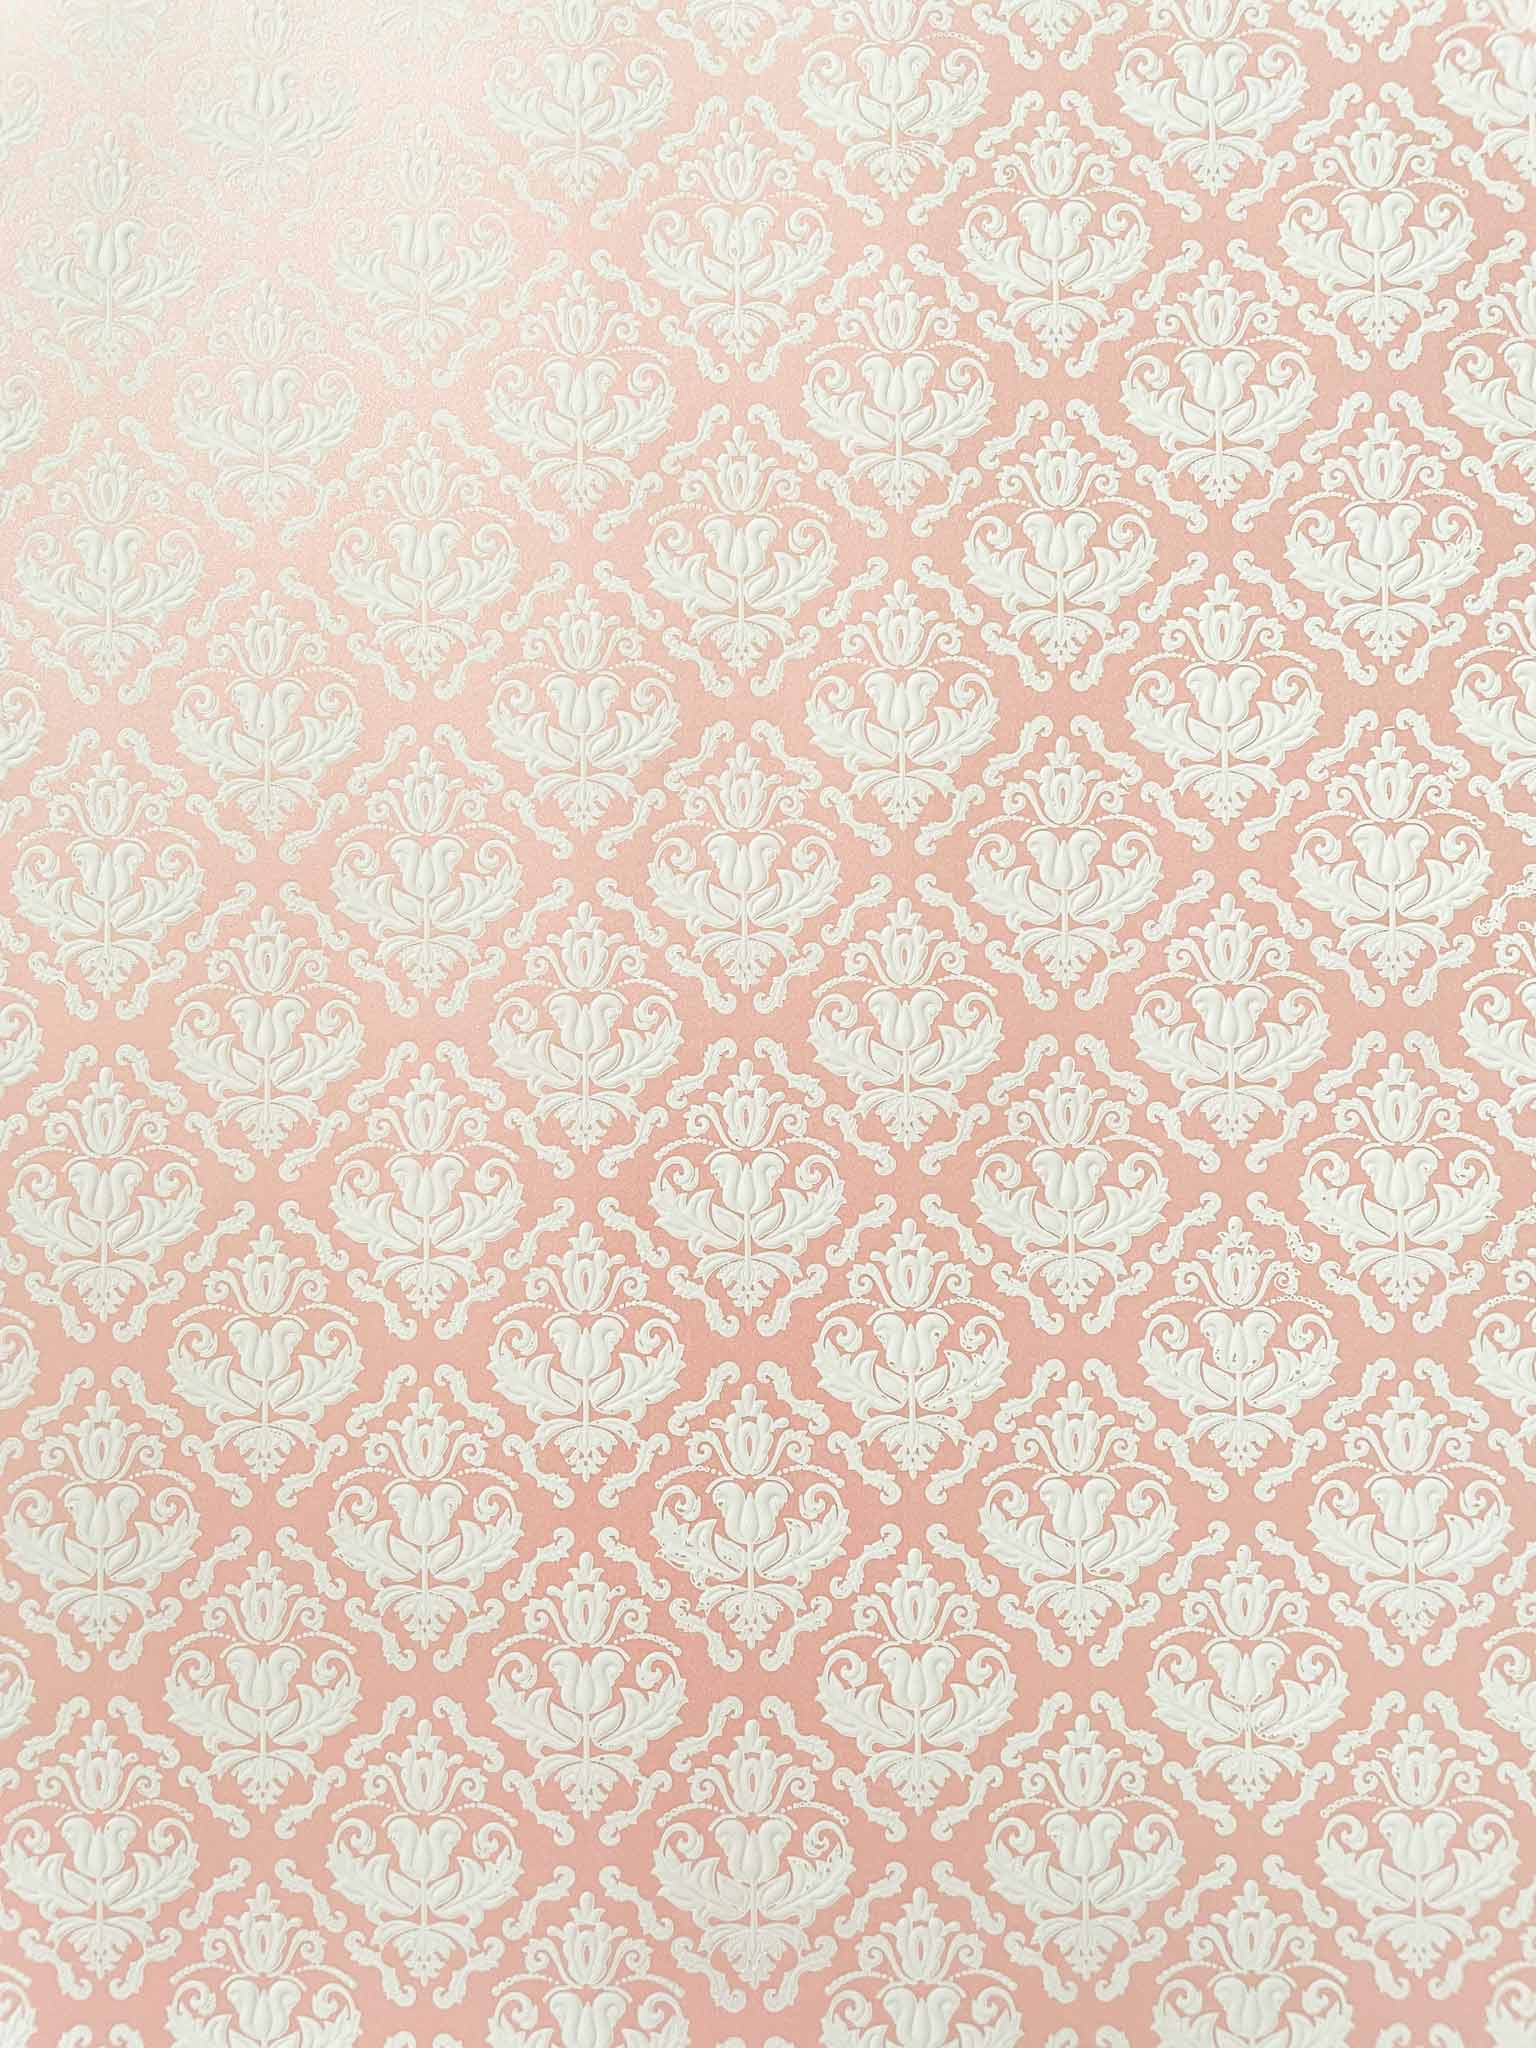 pink-and-white-embossed-damask-pattern-a4-paper